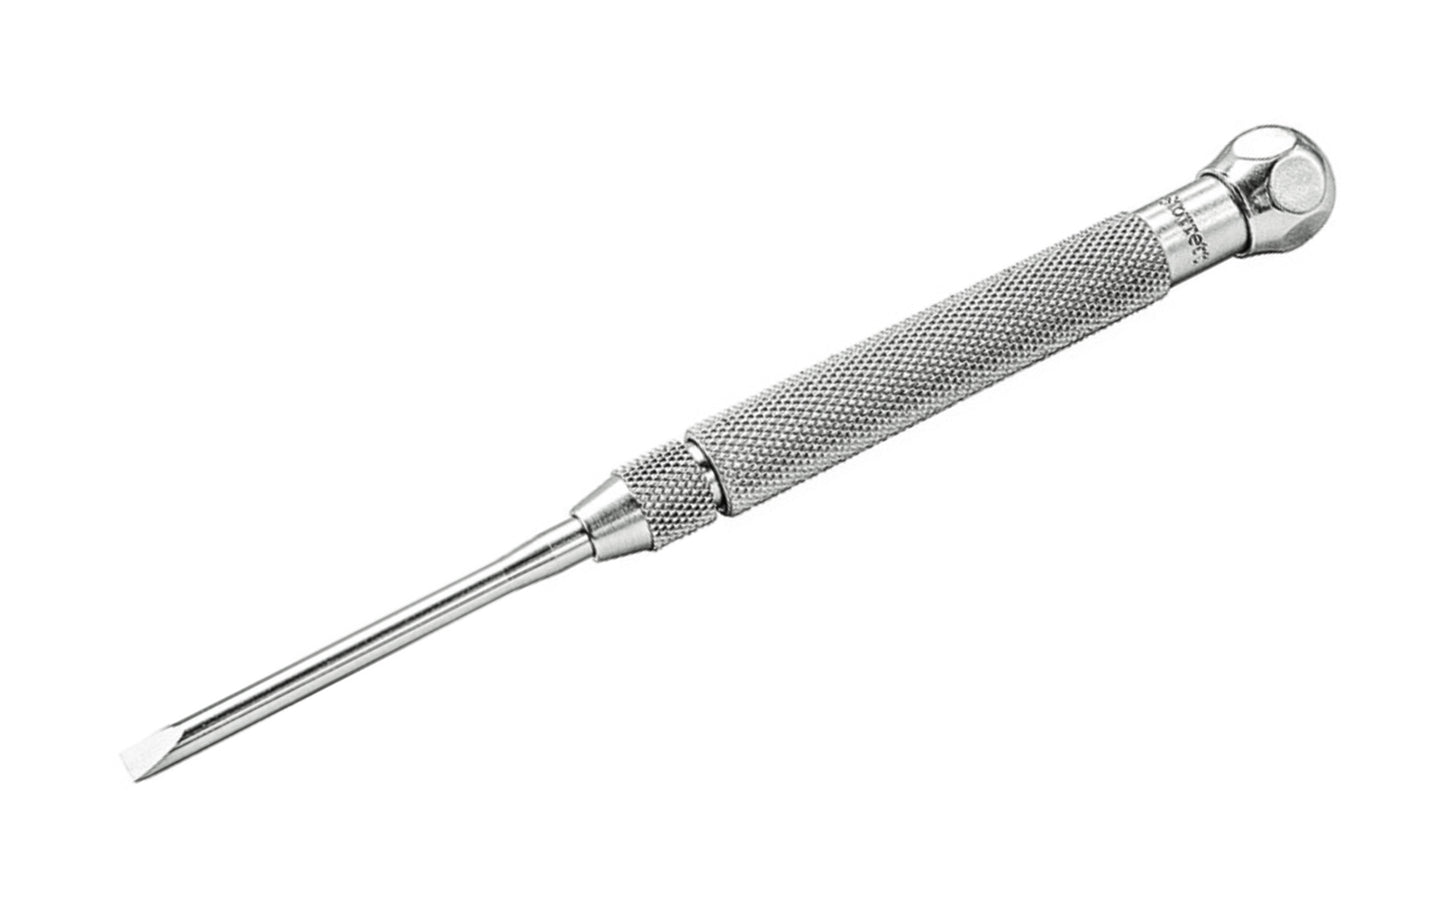 The 553B Pocket Screwdriver features a hexagonally shaped head to prevent them from rolling. When not in use, the blade can be reversed into the screwdriver body for conveniently & safely carrying them in pockets. Size takes no more room than a penknife. With 3" (75mm) Blade, Overall length is 5 5/8" (140mm). Slotted Head.   Made in USA.